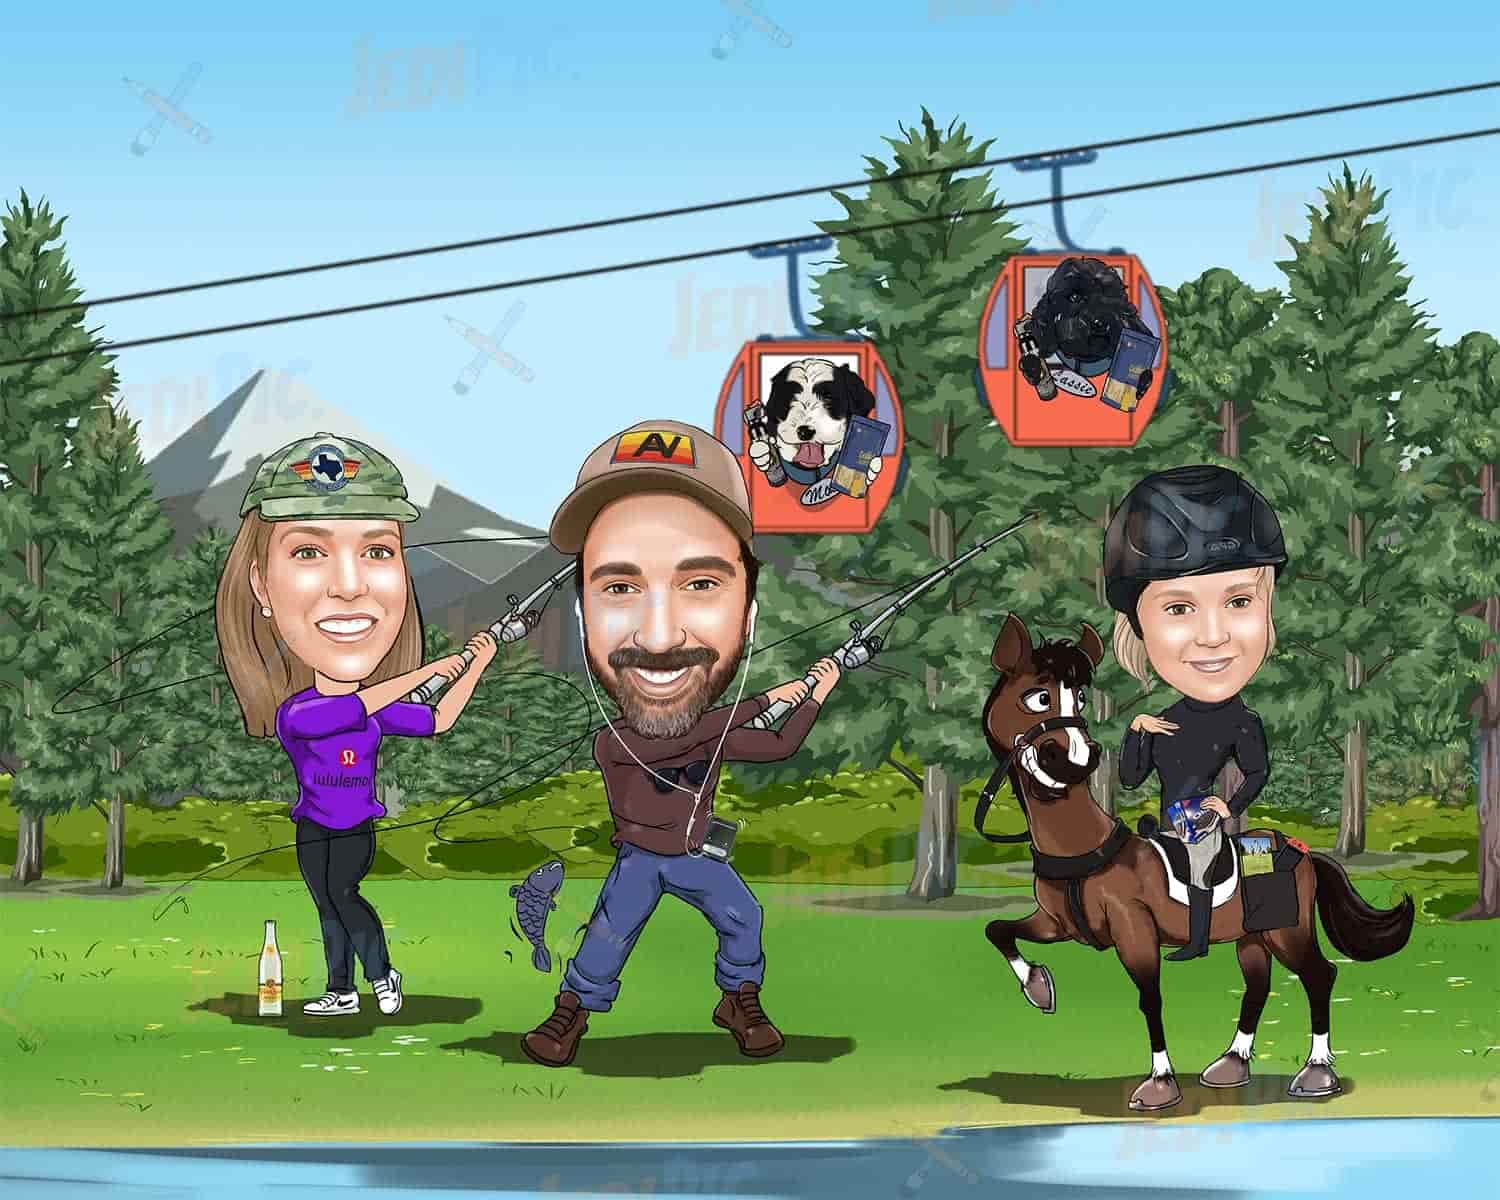 Funny Family Travel Vacation Drawing in Digital Style